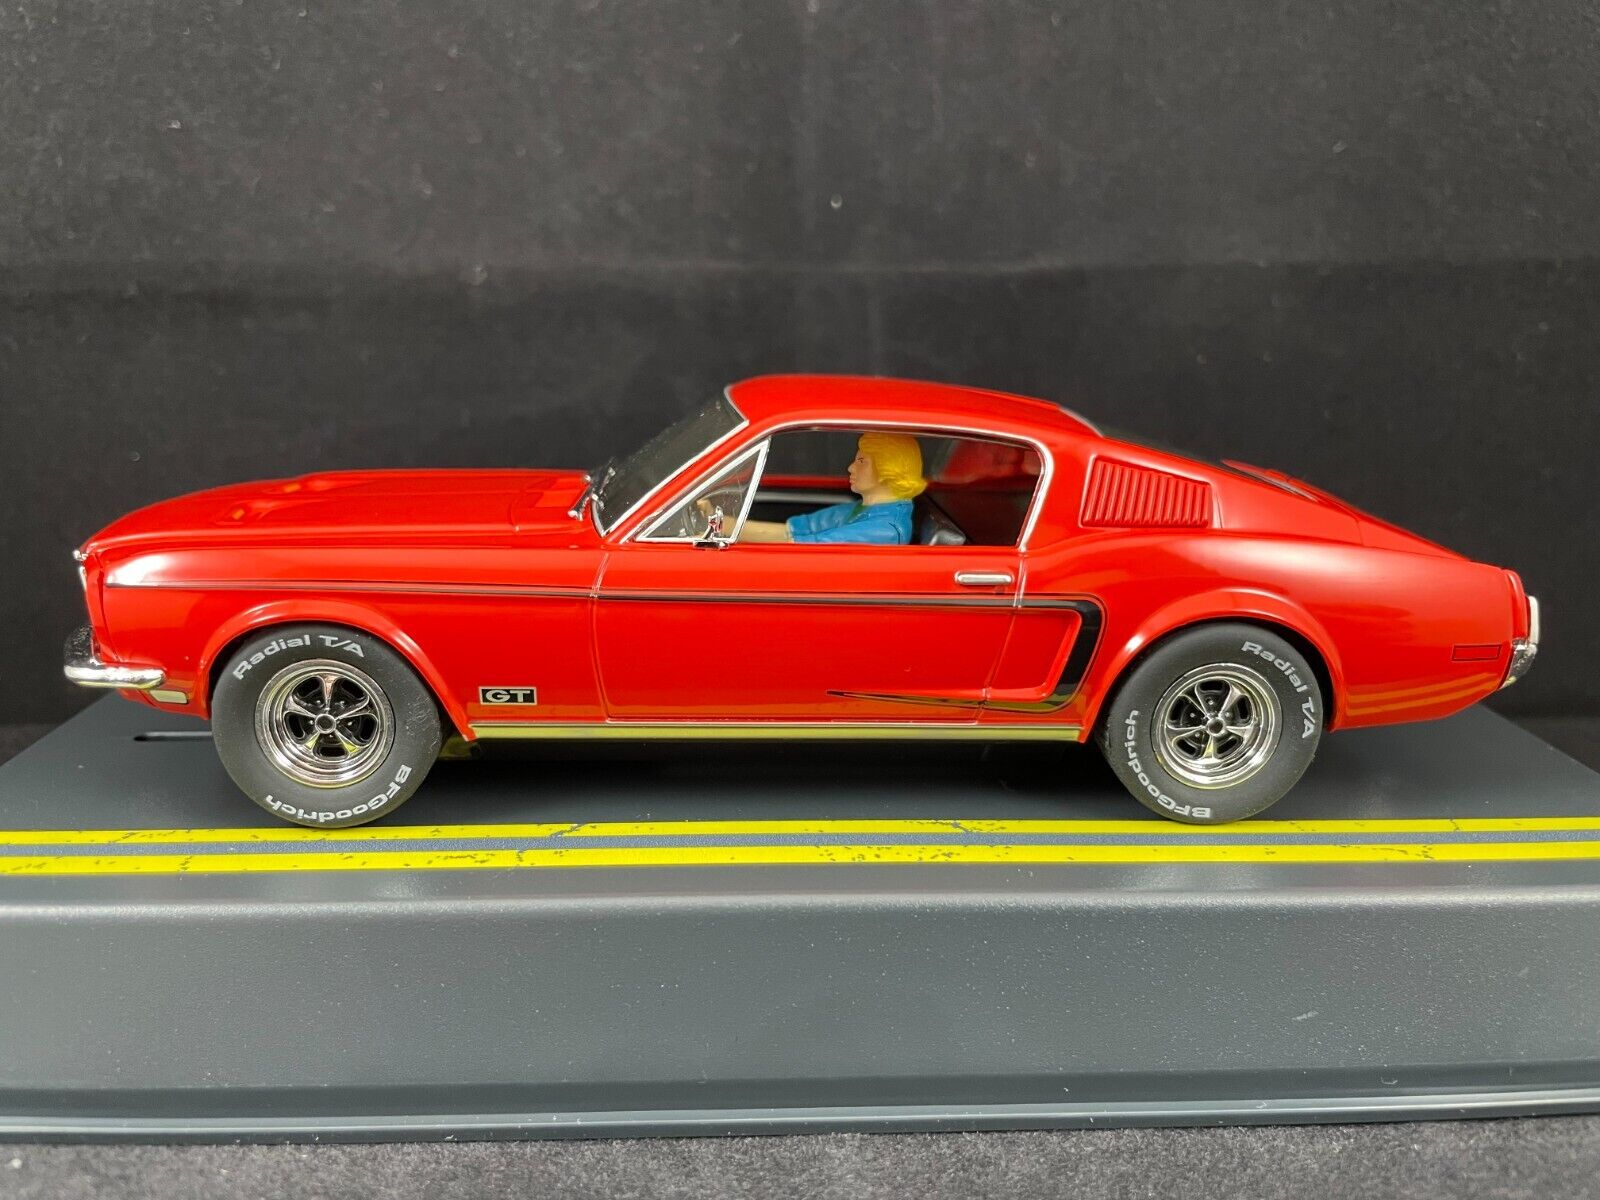 P151 PIONEER FORD MUSTANG FASTBACK GT ROUTE 66 LTD ED RED 1:32 SCALE ...